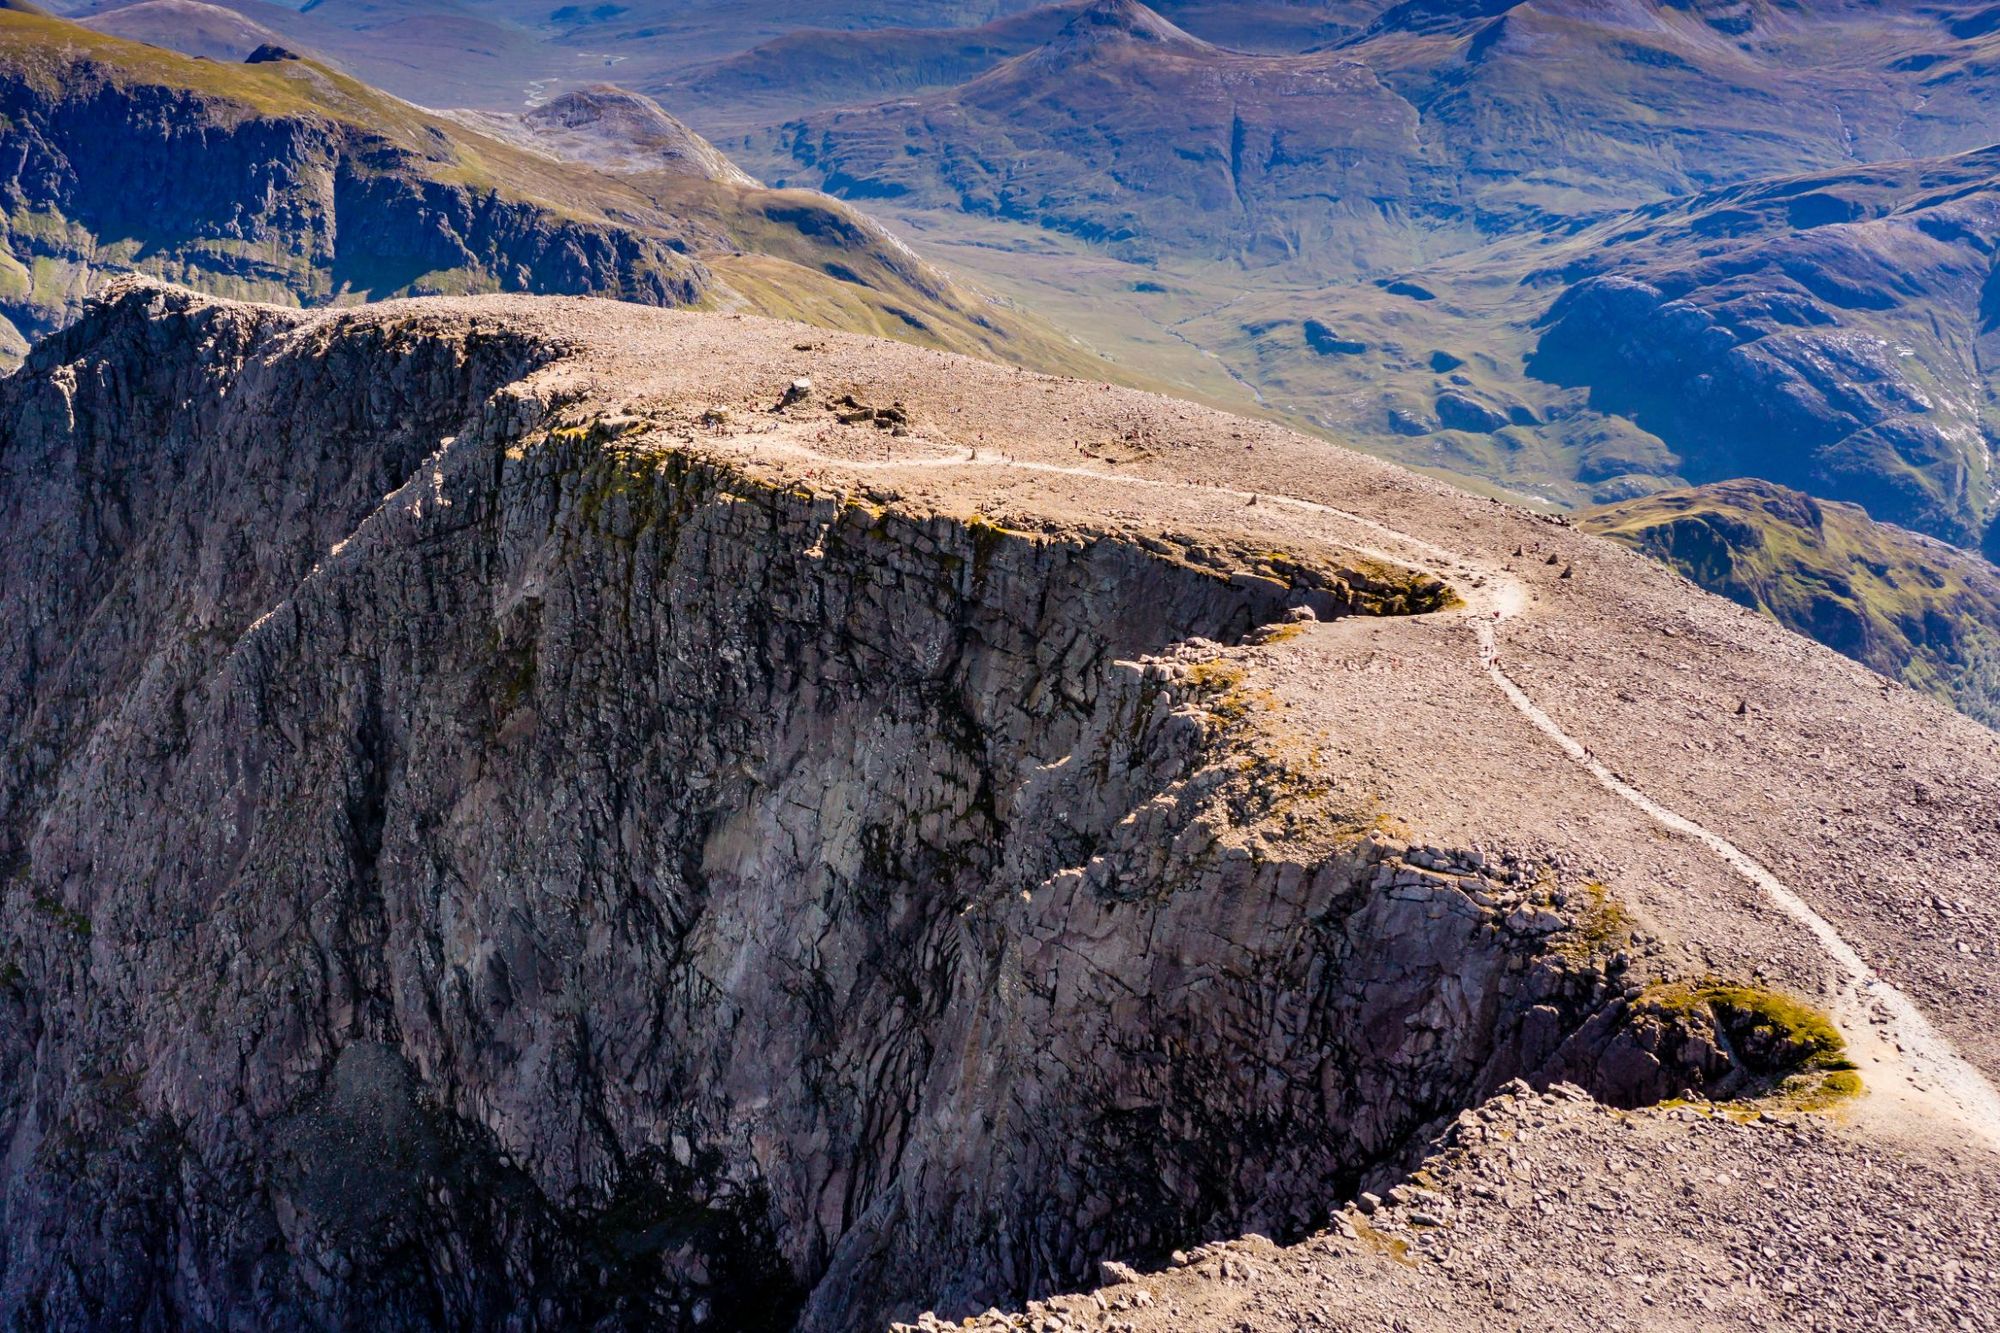 An aeral view of the summit of Ben Nevis in Scotland - the UK's tallest mountain peak. Photo: Getty